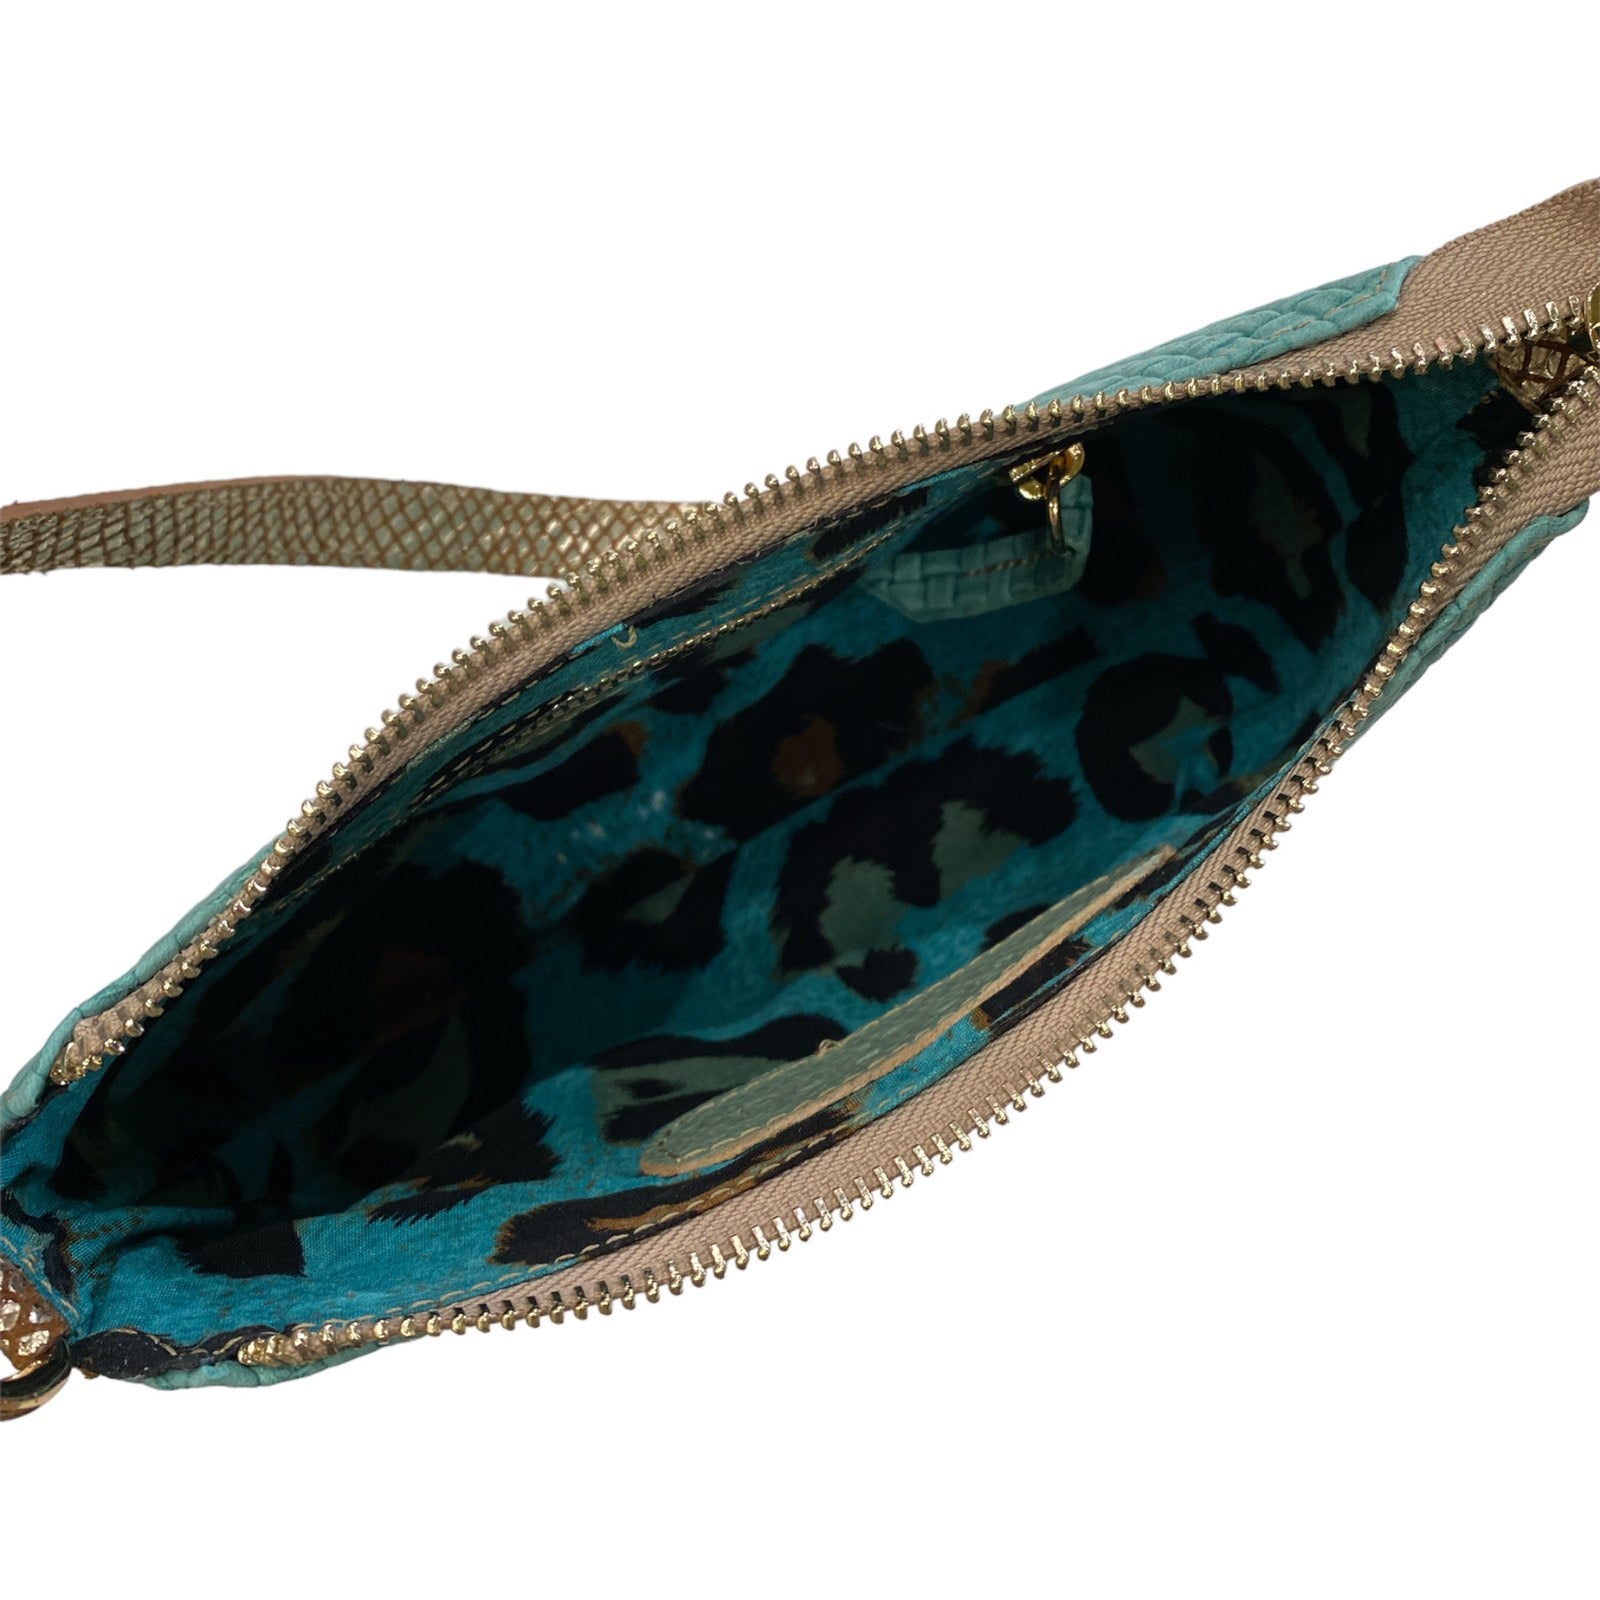 Natalie Small. Turquoise and gold leather evening bag